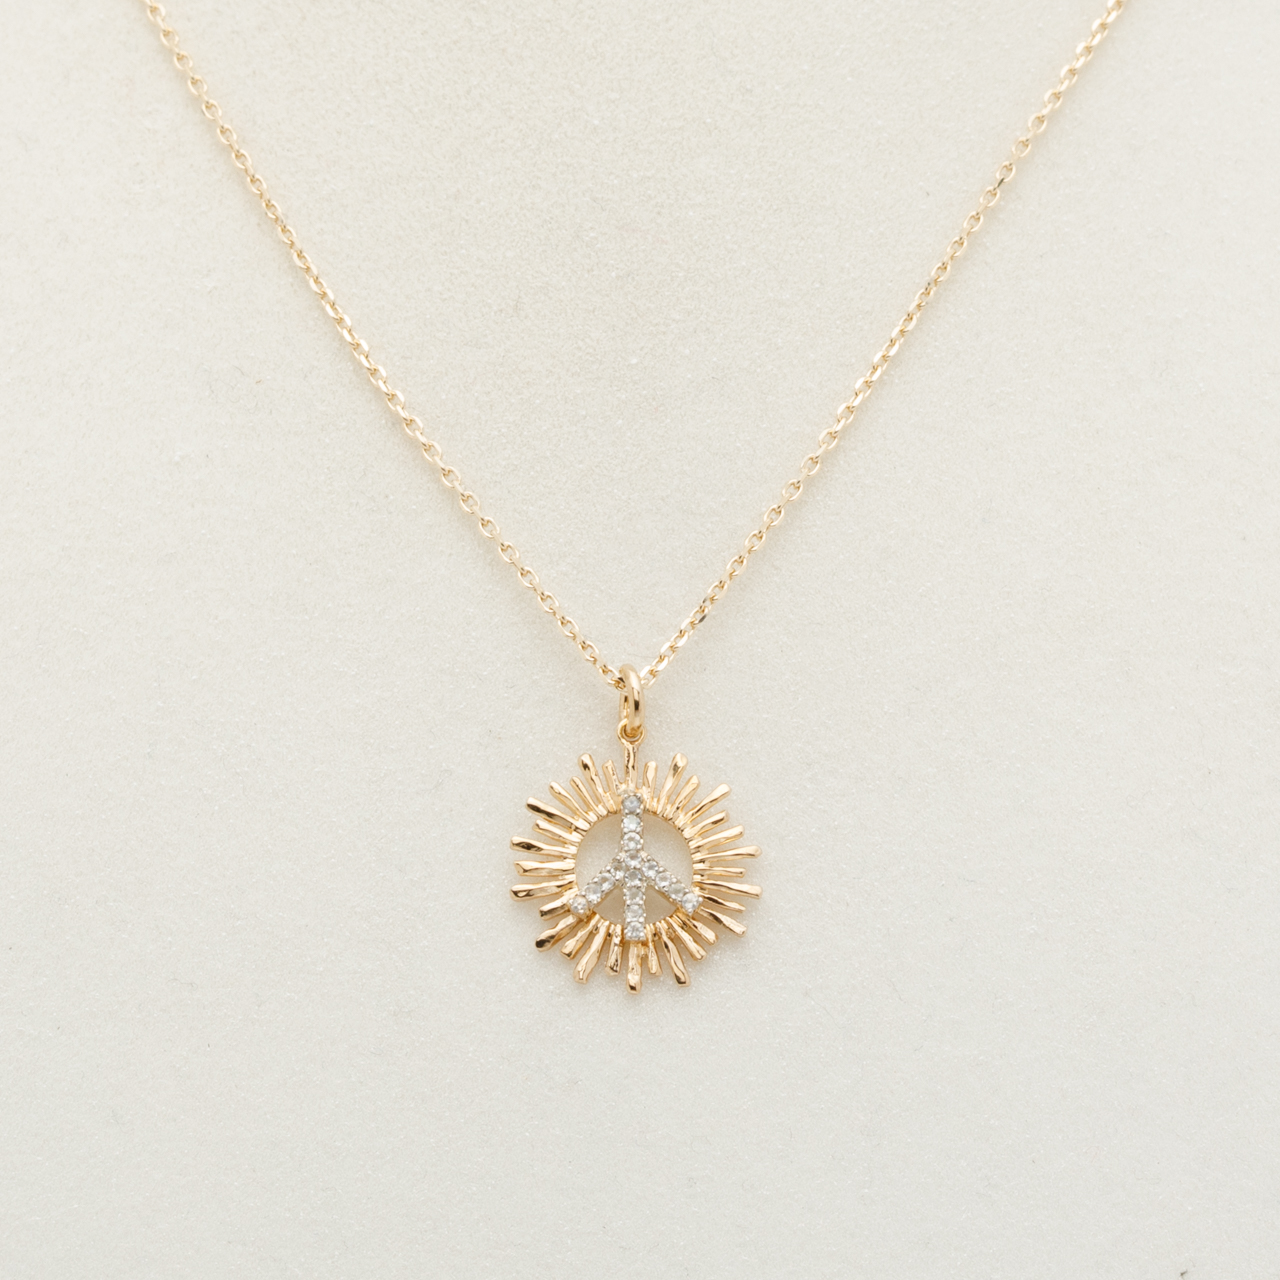 203Jewelry Sunnypeace Dia Large Necklace - ネックレス